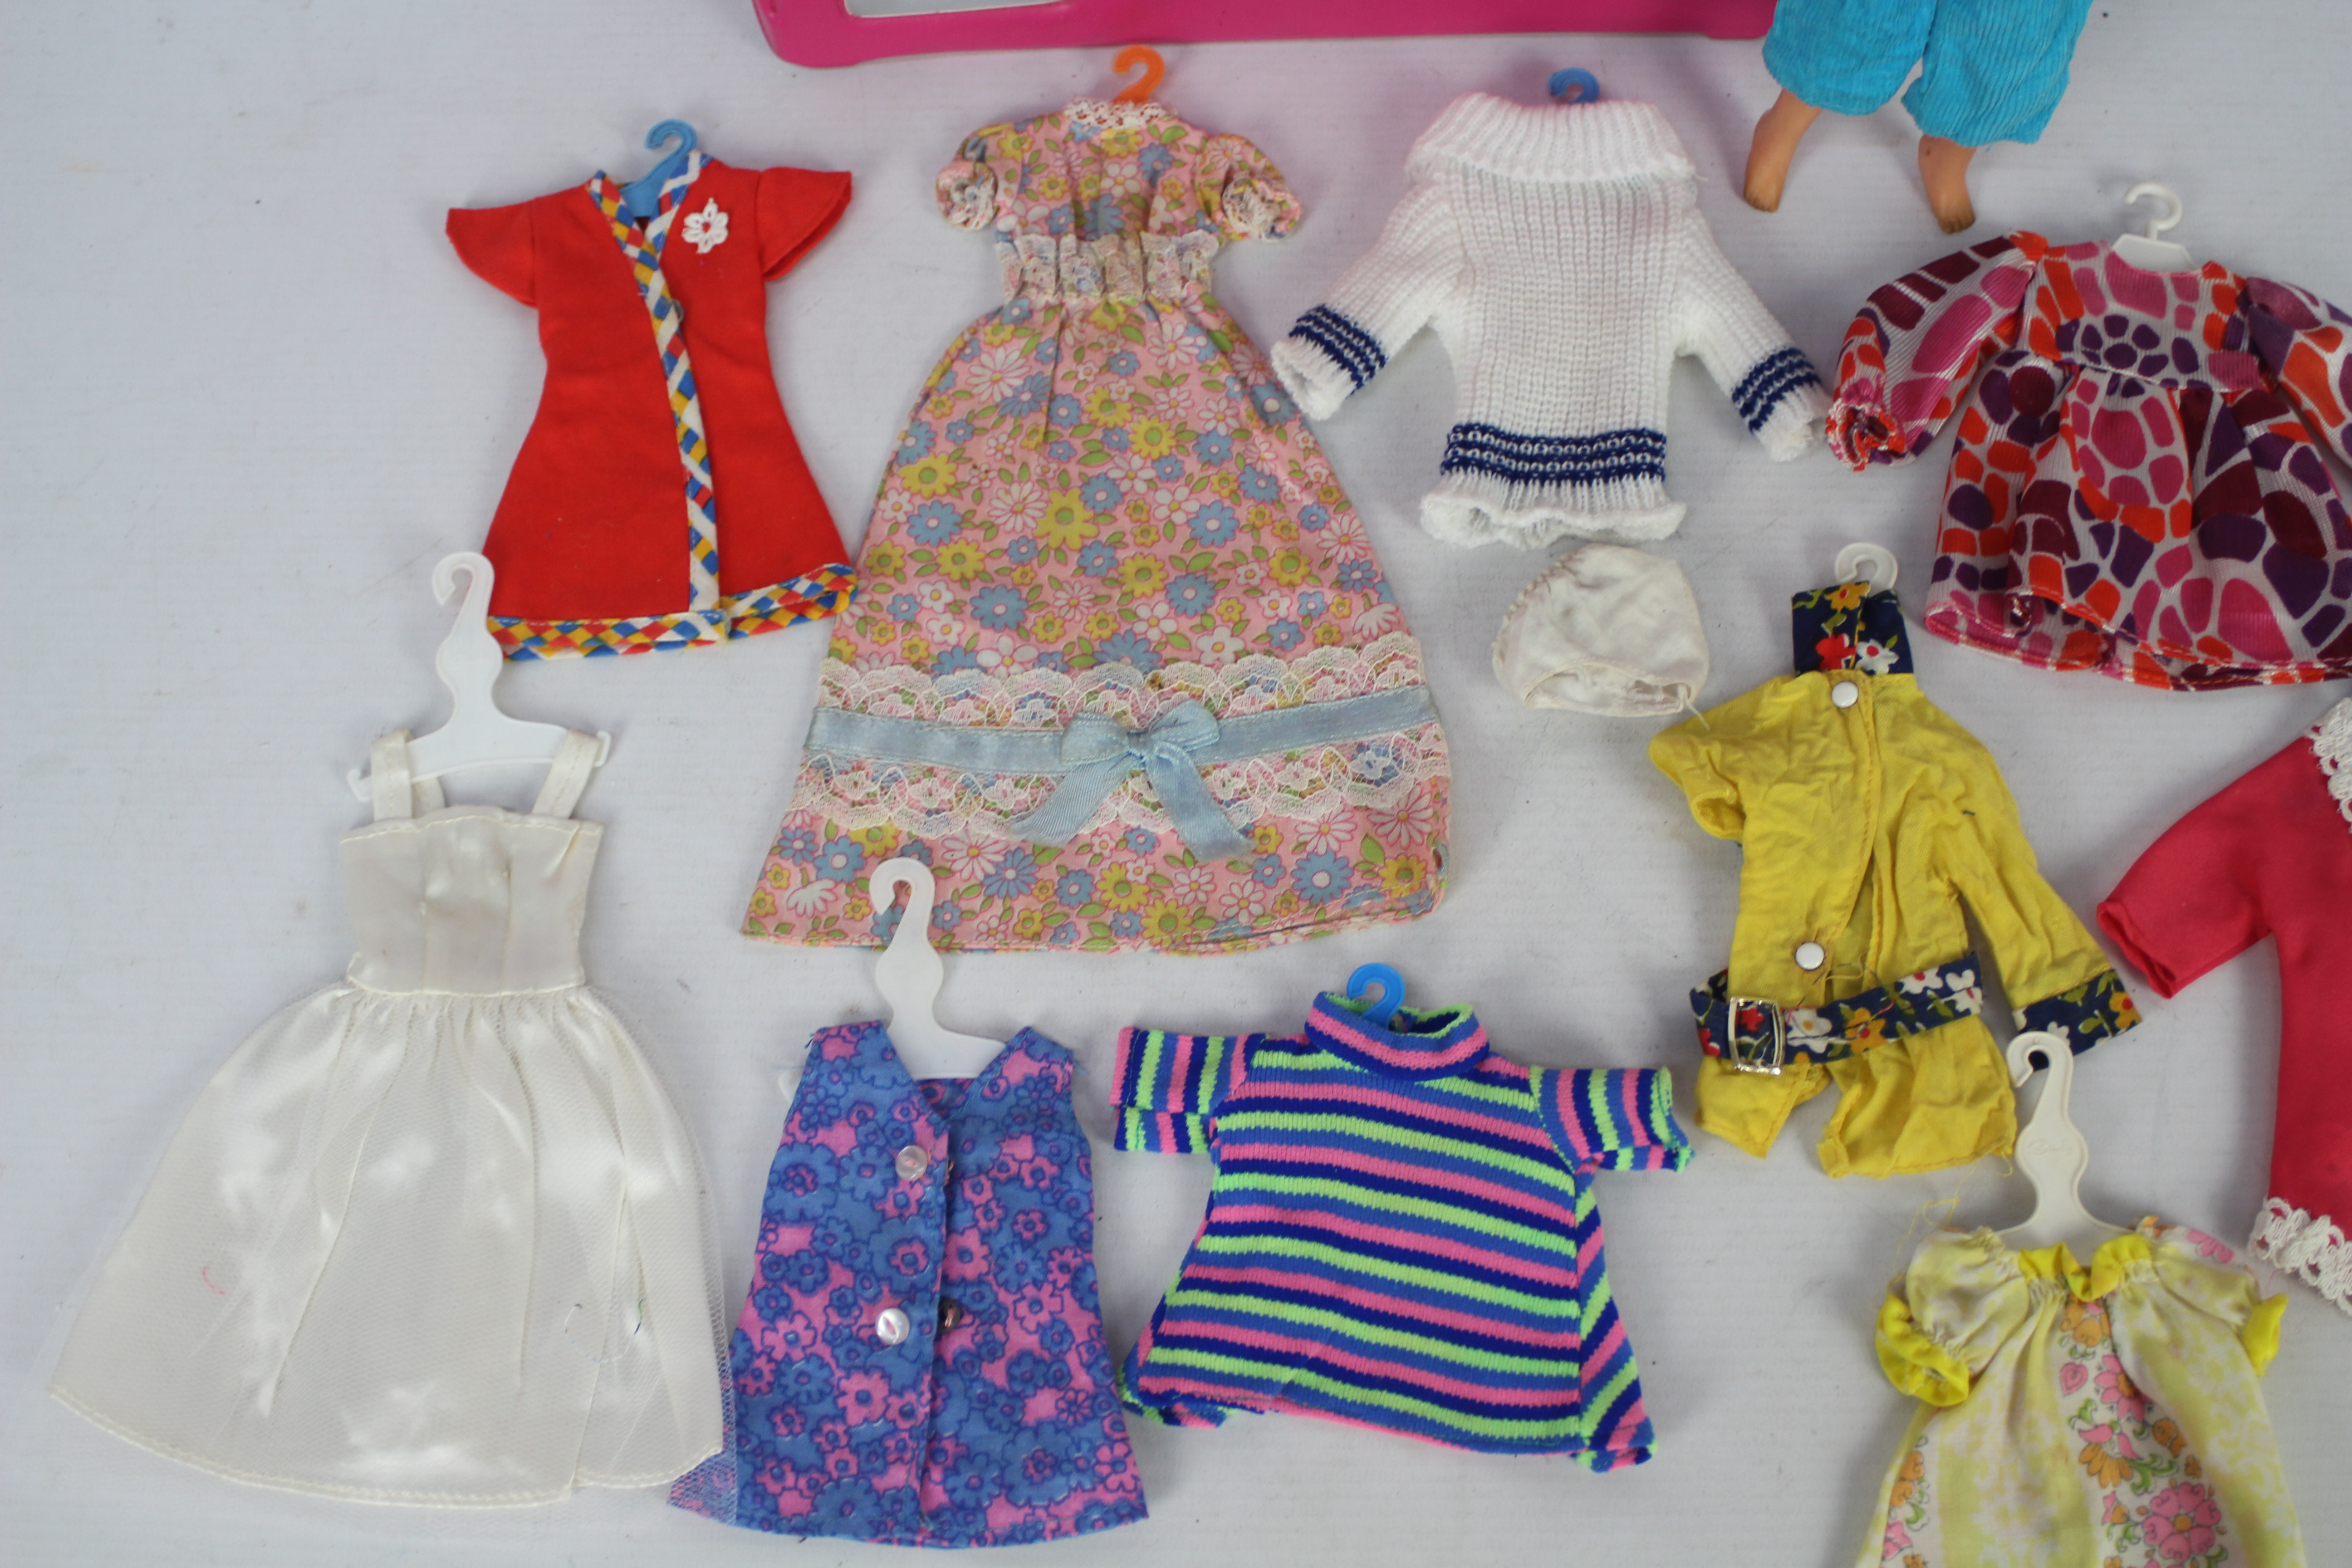 Sindy - A vintage Sindy carry case with doll and 12 x clothes hangers with outfits. - Image 4 of 7